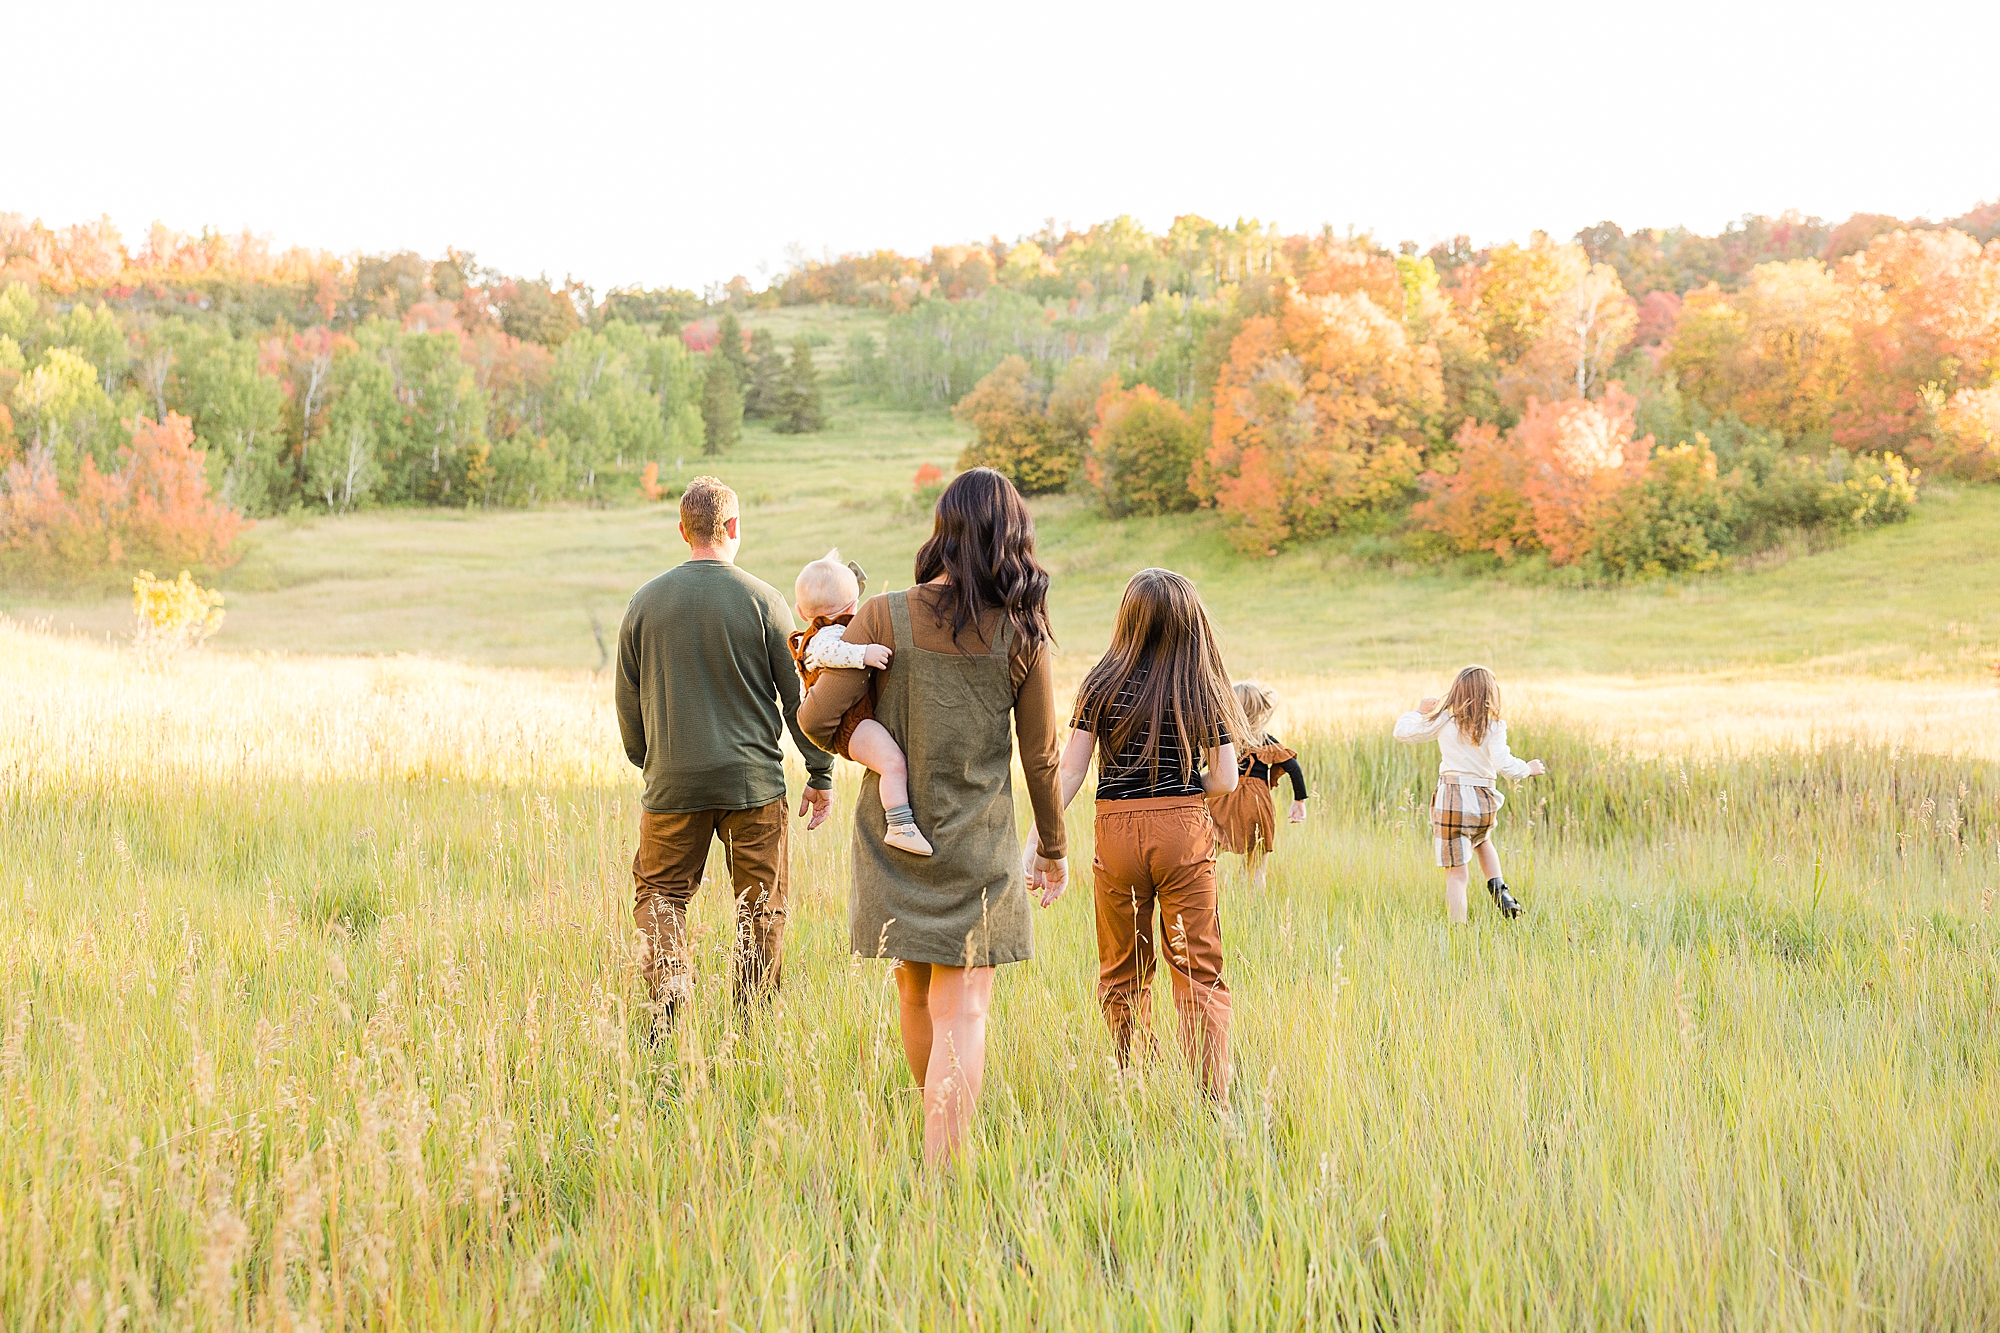 A large field full of vibrant fall colors. Perfect for your family session!